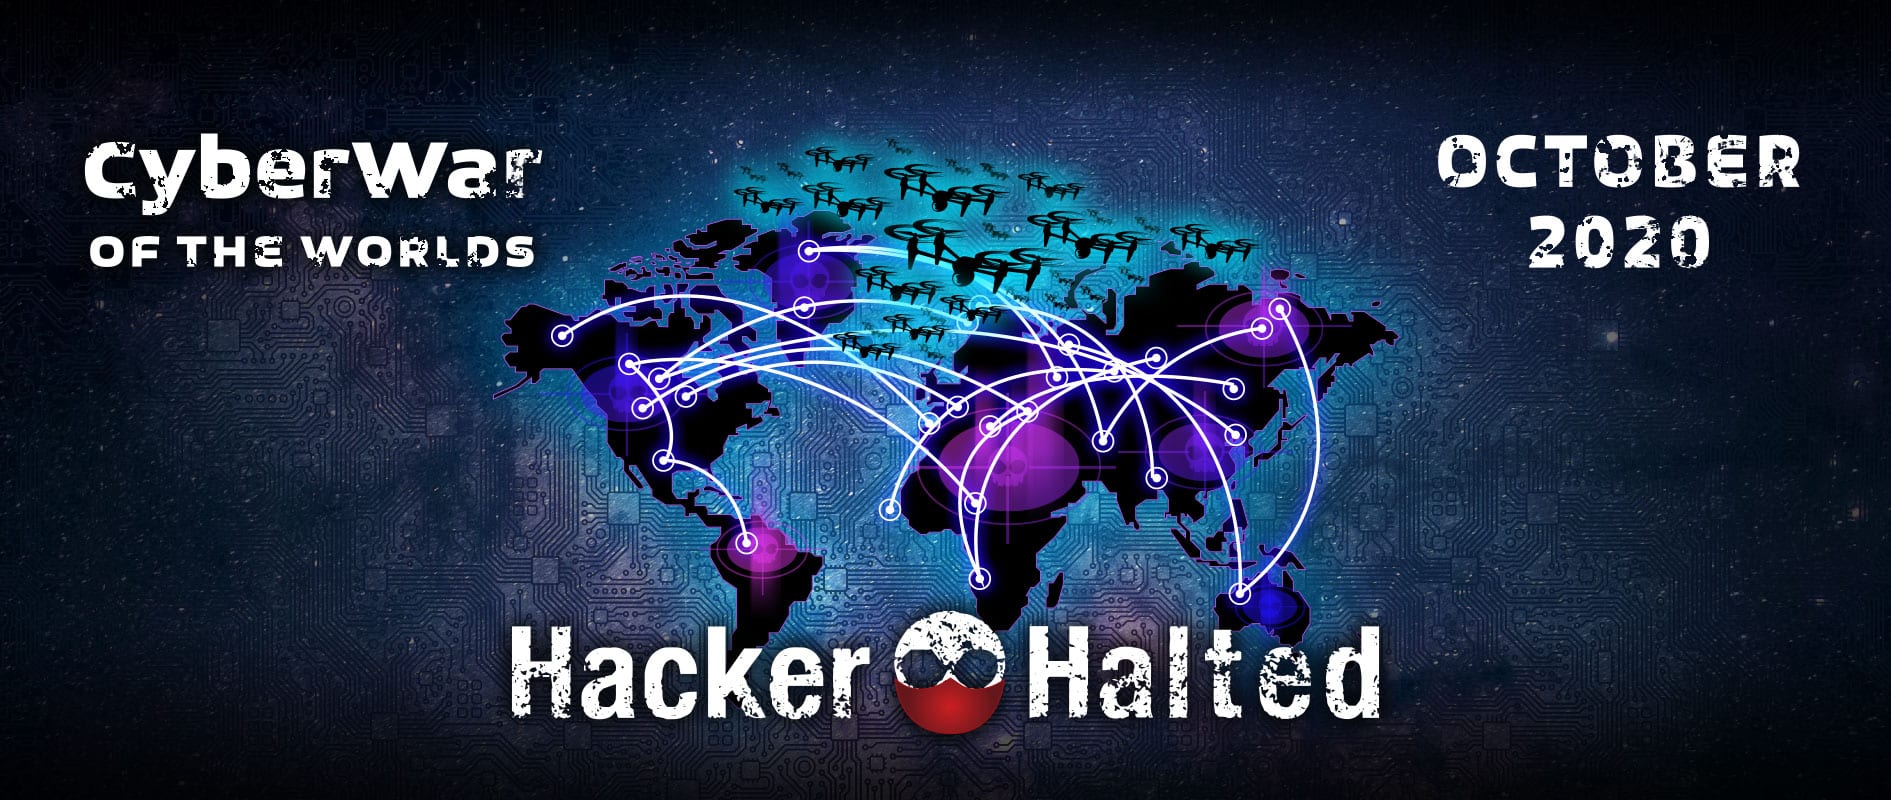 Hacker Halted coference